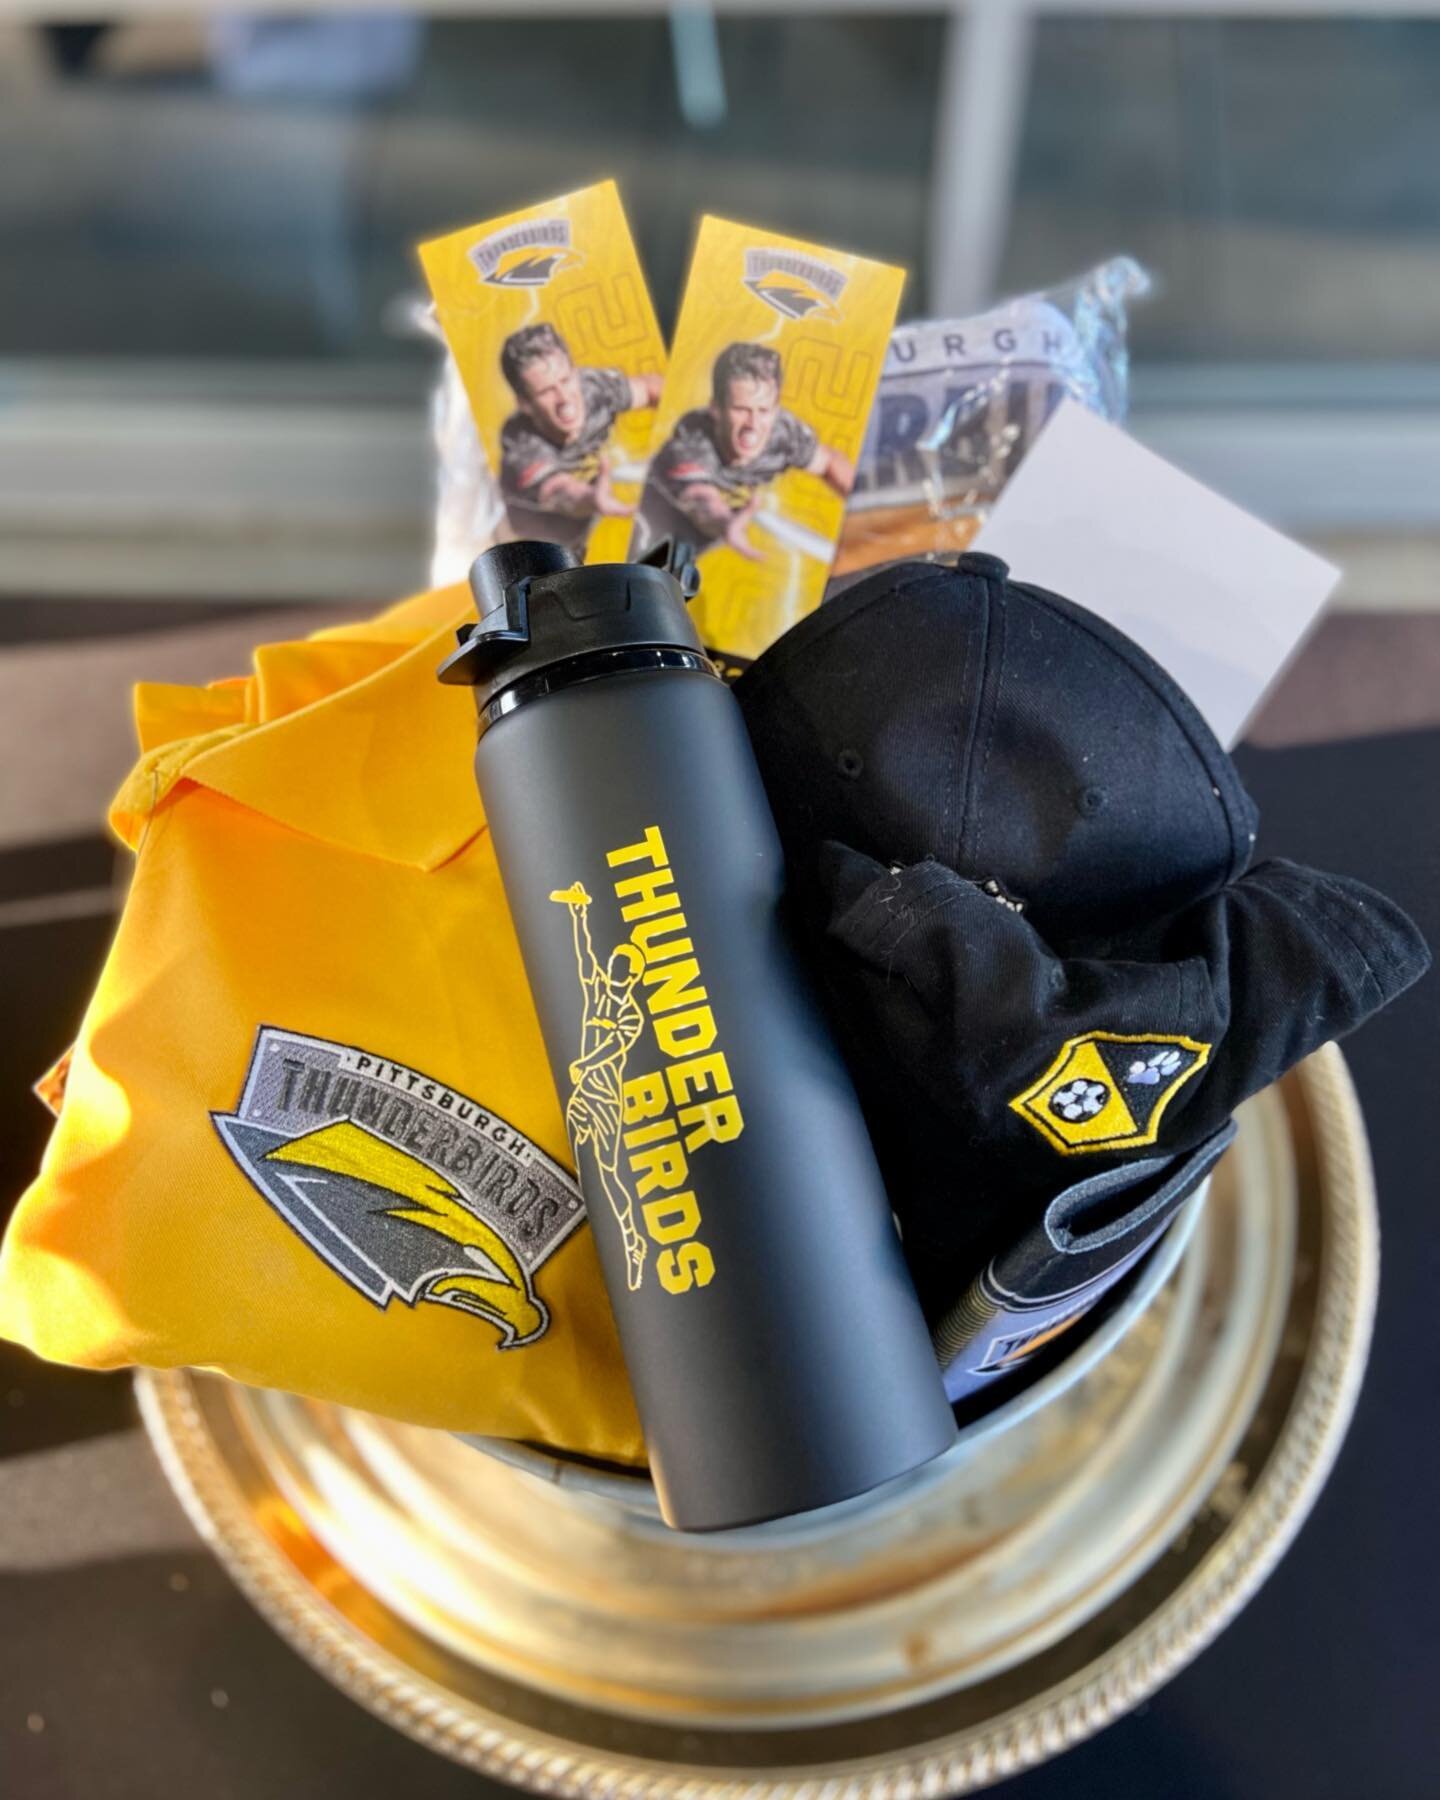 Go Thunderbirds!! 🙌 @pghthunderbirds 

We are in the heat of the game tonight at Highmark Stadium @highmarkstadium 🔥AND to top off some ultimate frisbee action, Mint is partnering with the Thunderbirds to give away this amazing Bird Bundle!! ⚡️ 

I